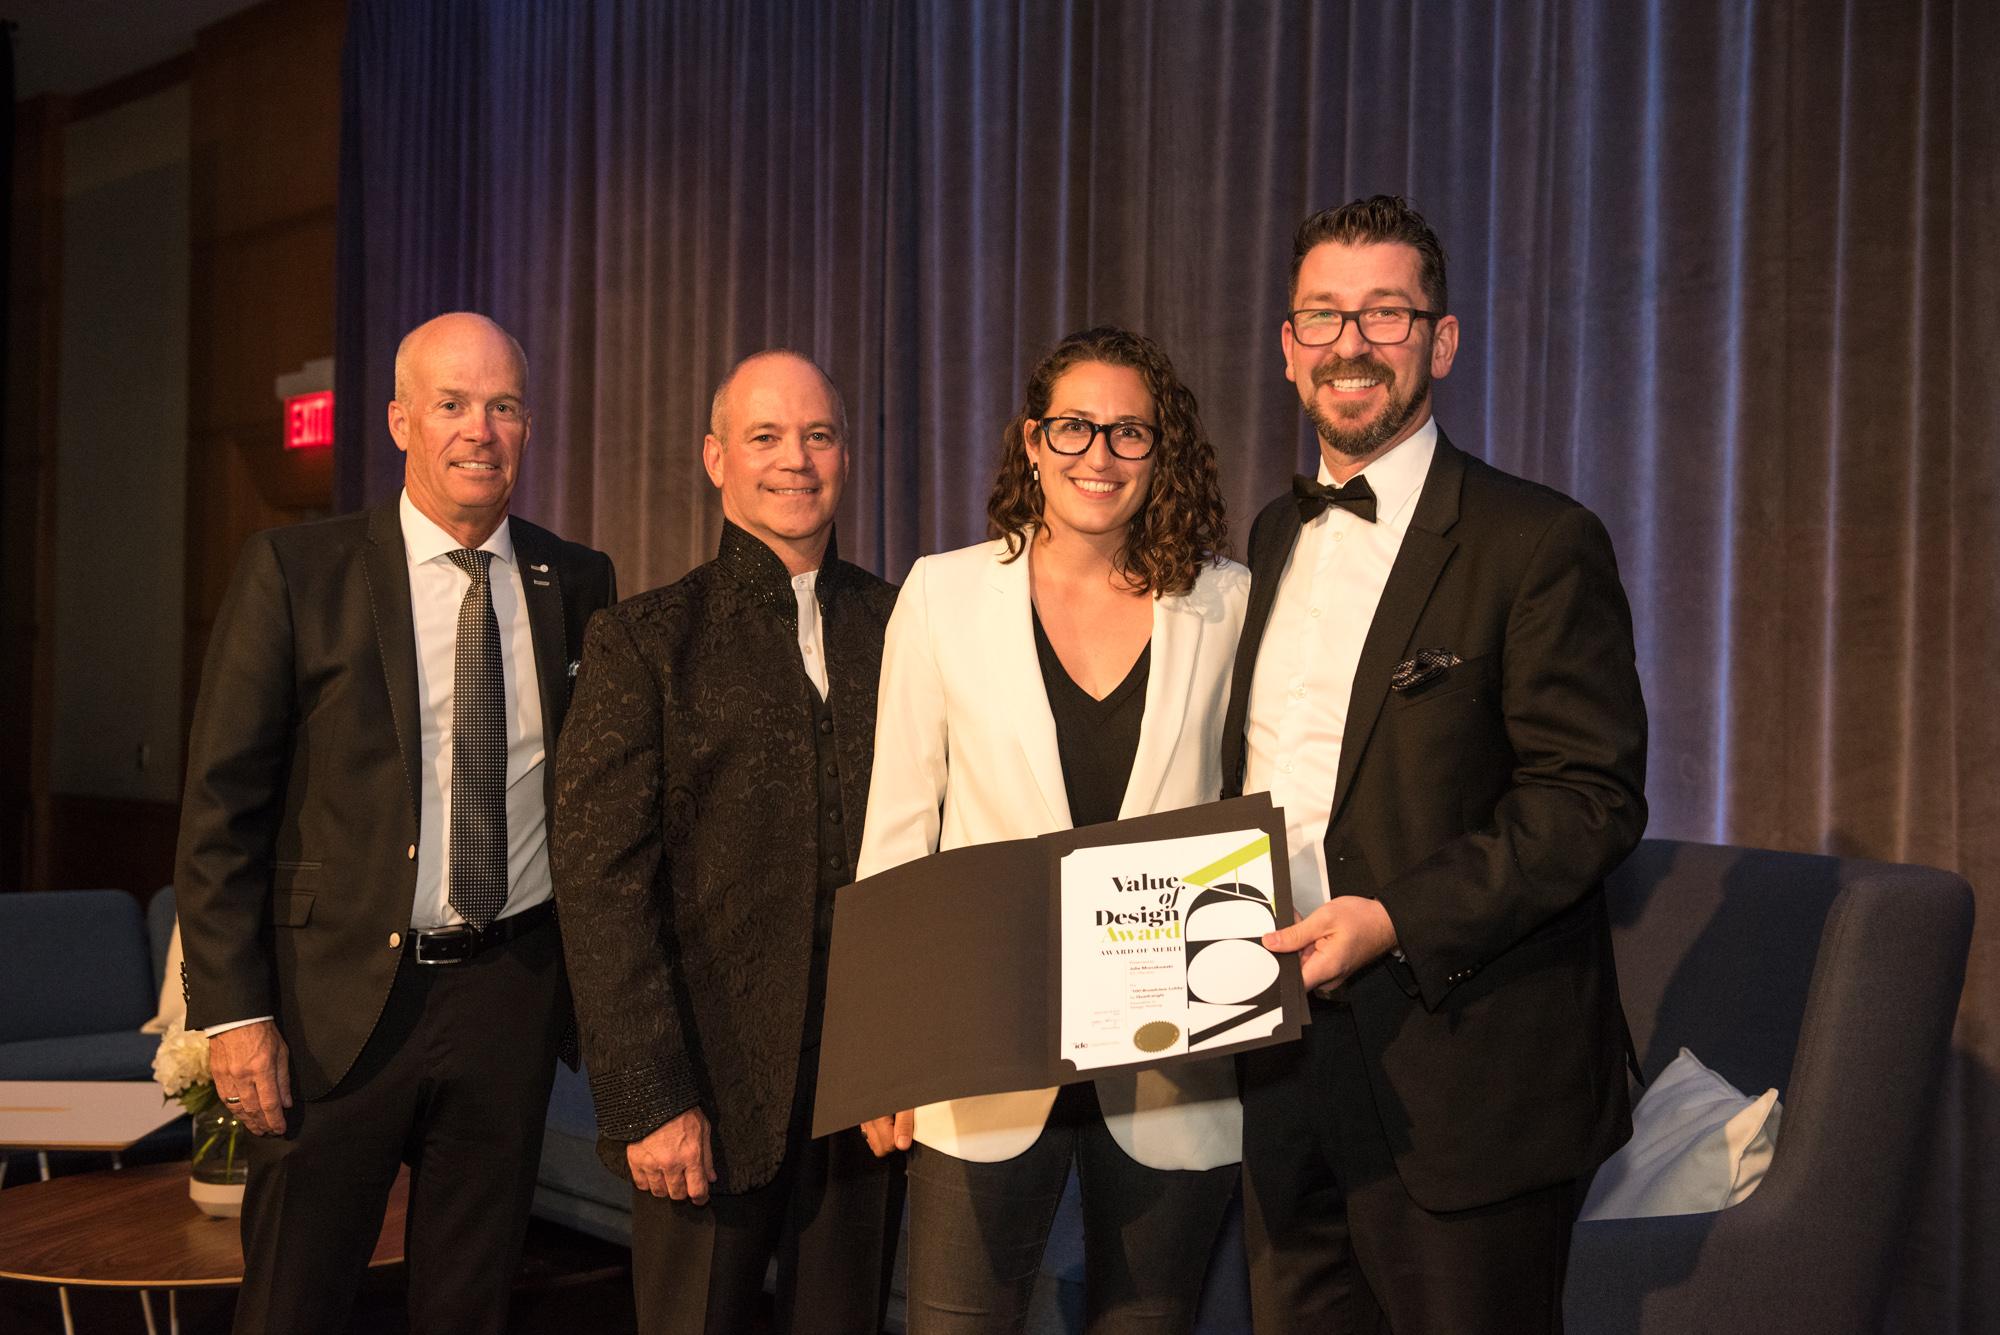 Quadrangle Associate Julie Mroczkowski posing for a photo with three men in suits, accepting a Value of Design Awards certificate